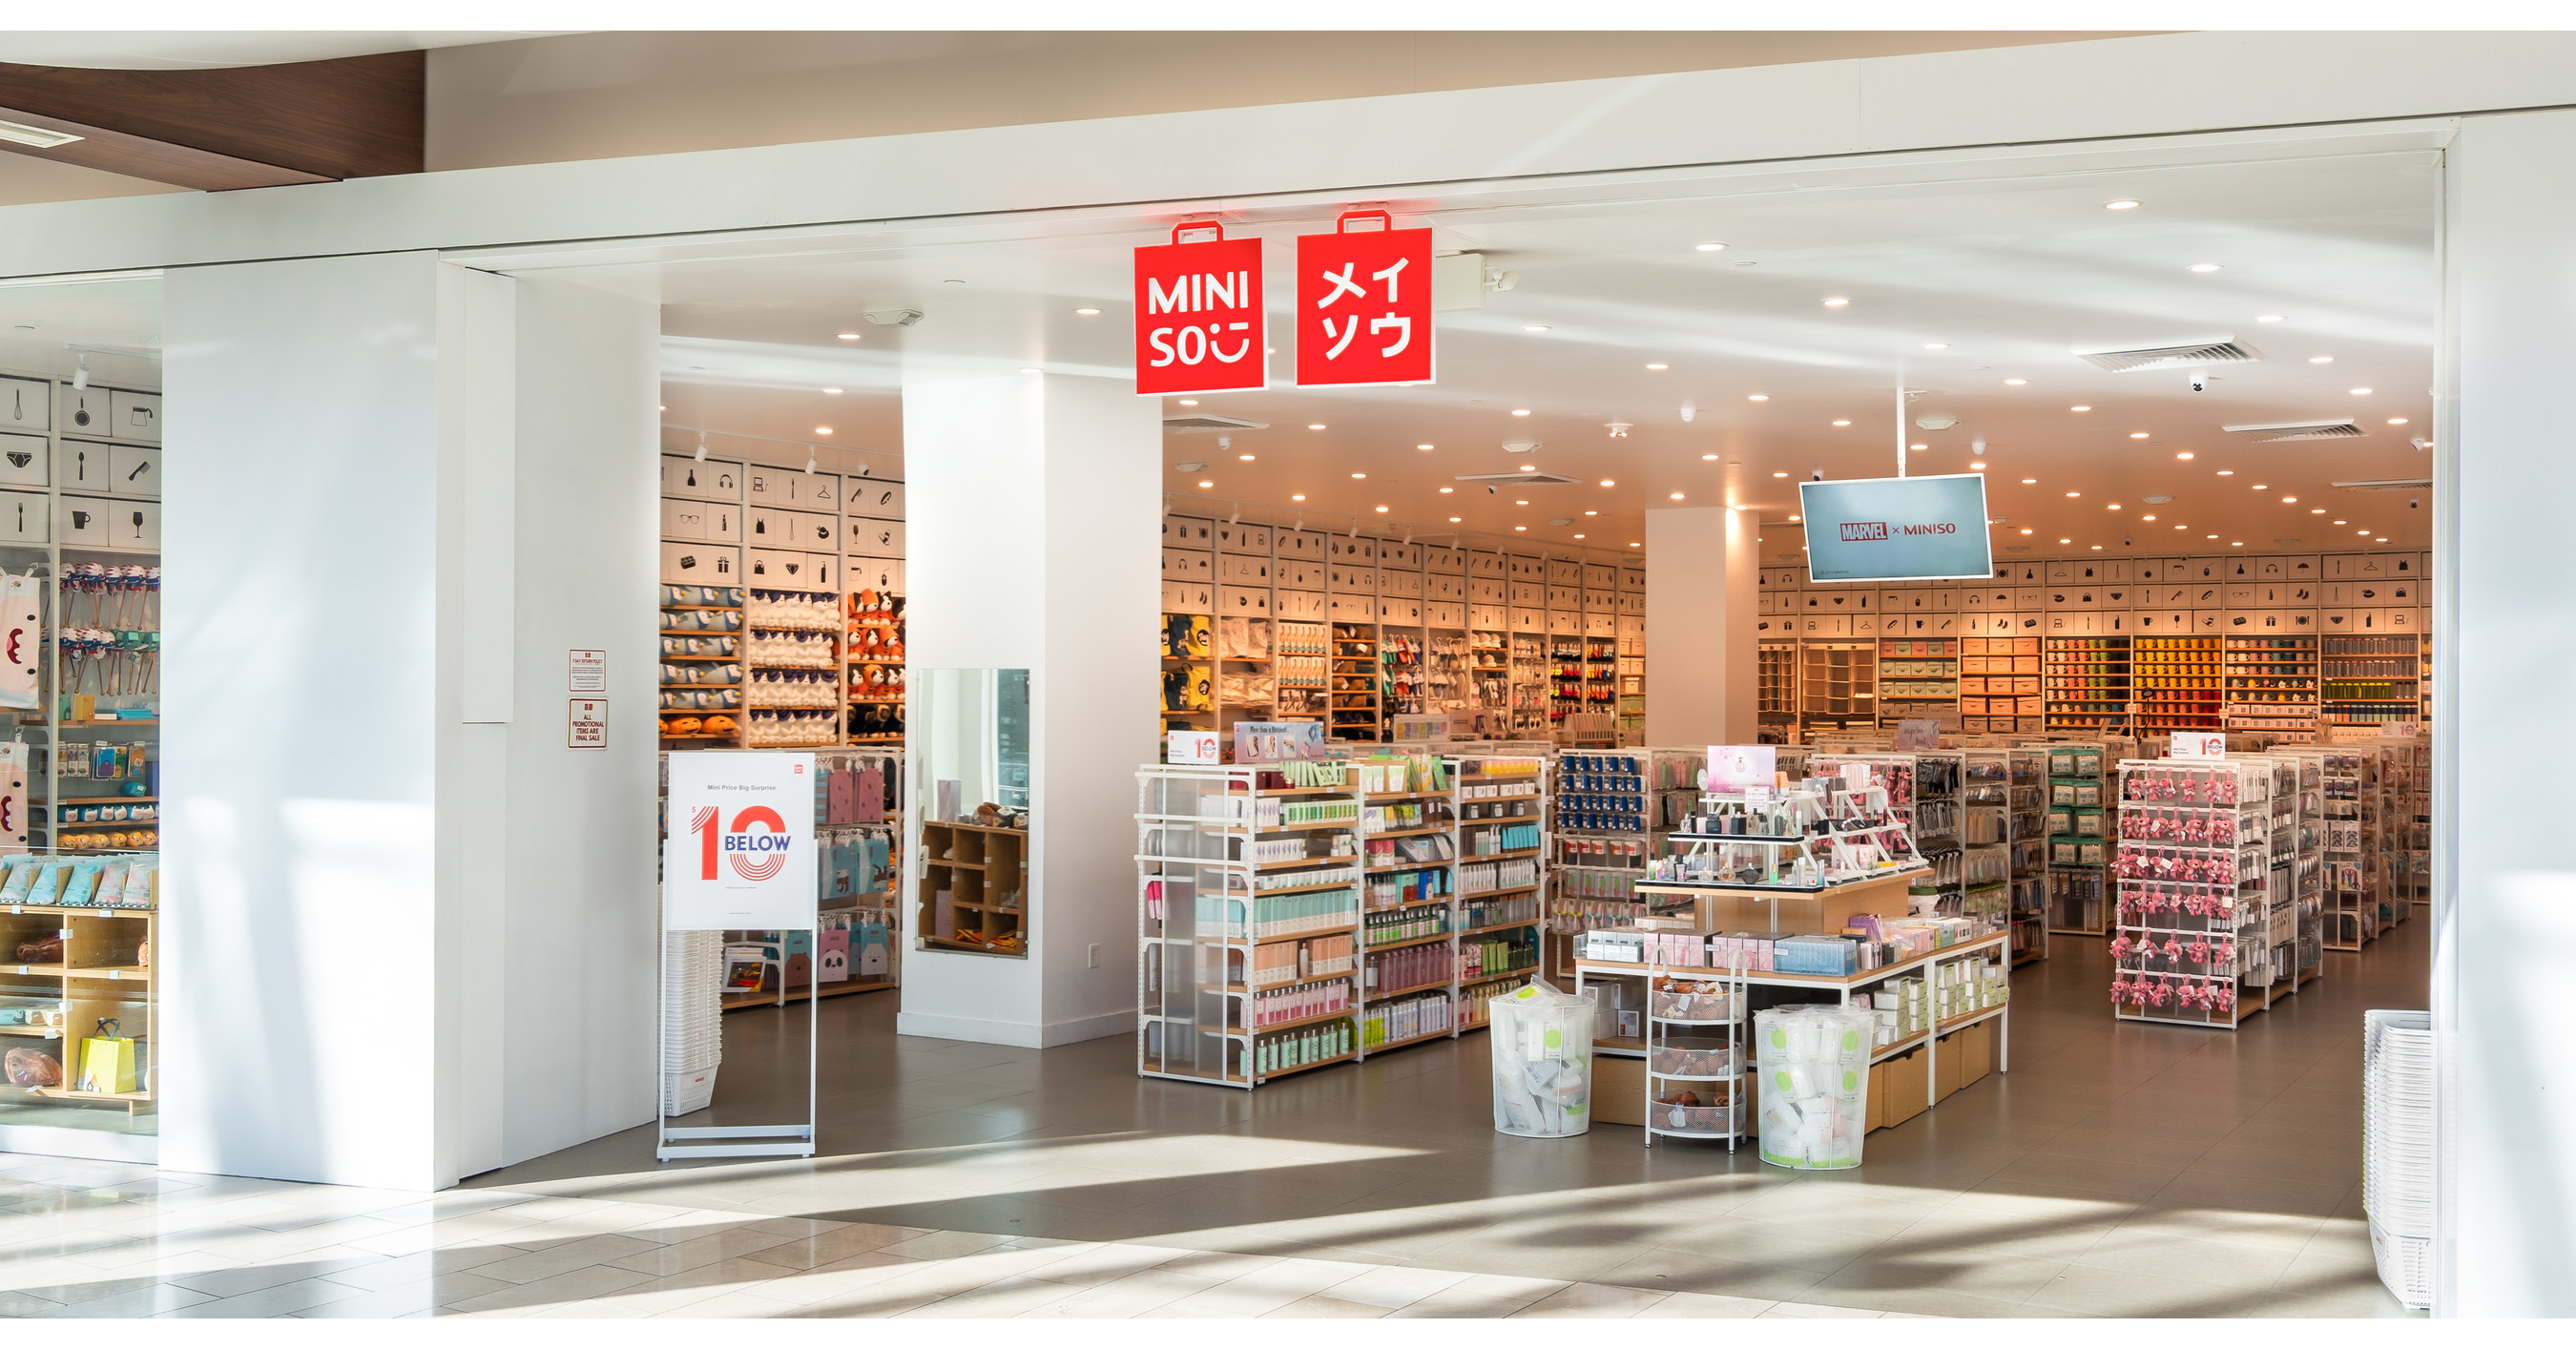 Lifestyle Brand MINISO Premieres Its First New York City Location